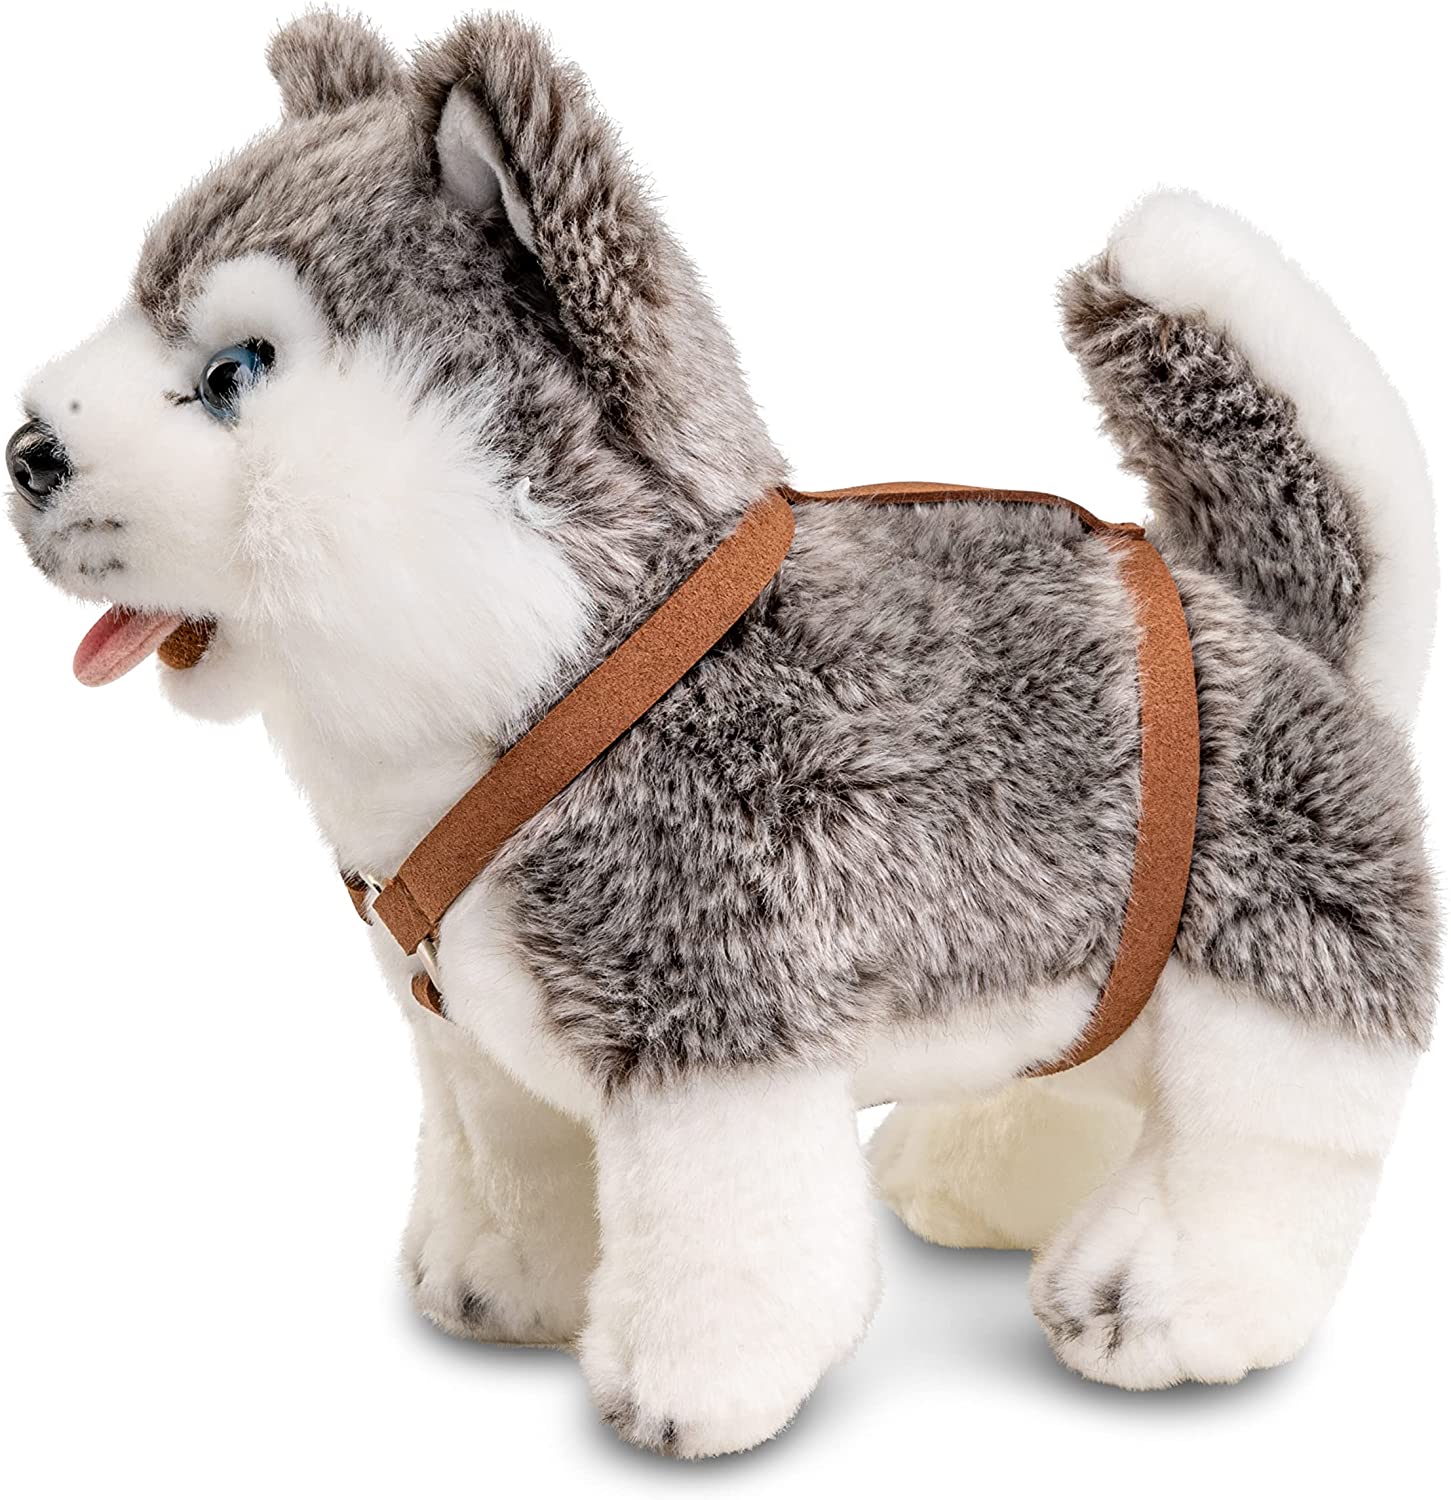 Husky puppy grey, with harness - standing - 24 cm (length)